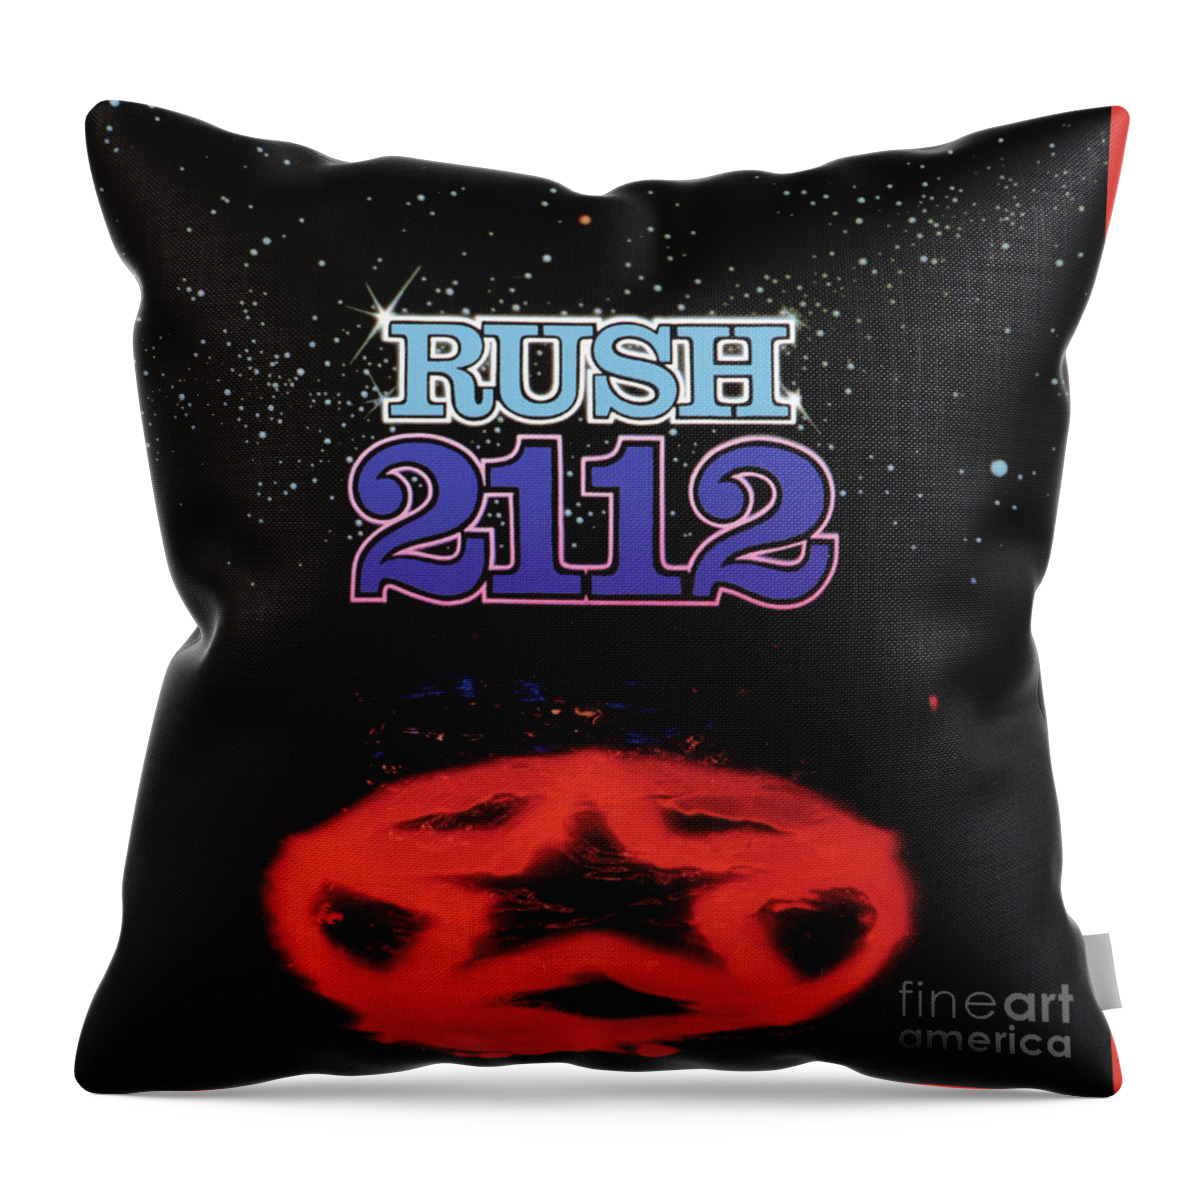 Rush Throw Pillow featuring the photograph Rush 2112 Album Cover by Action